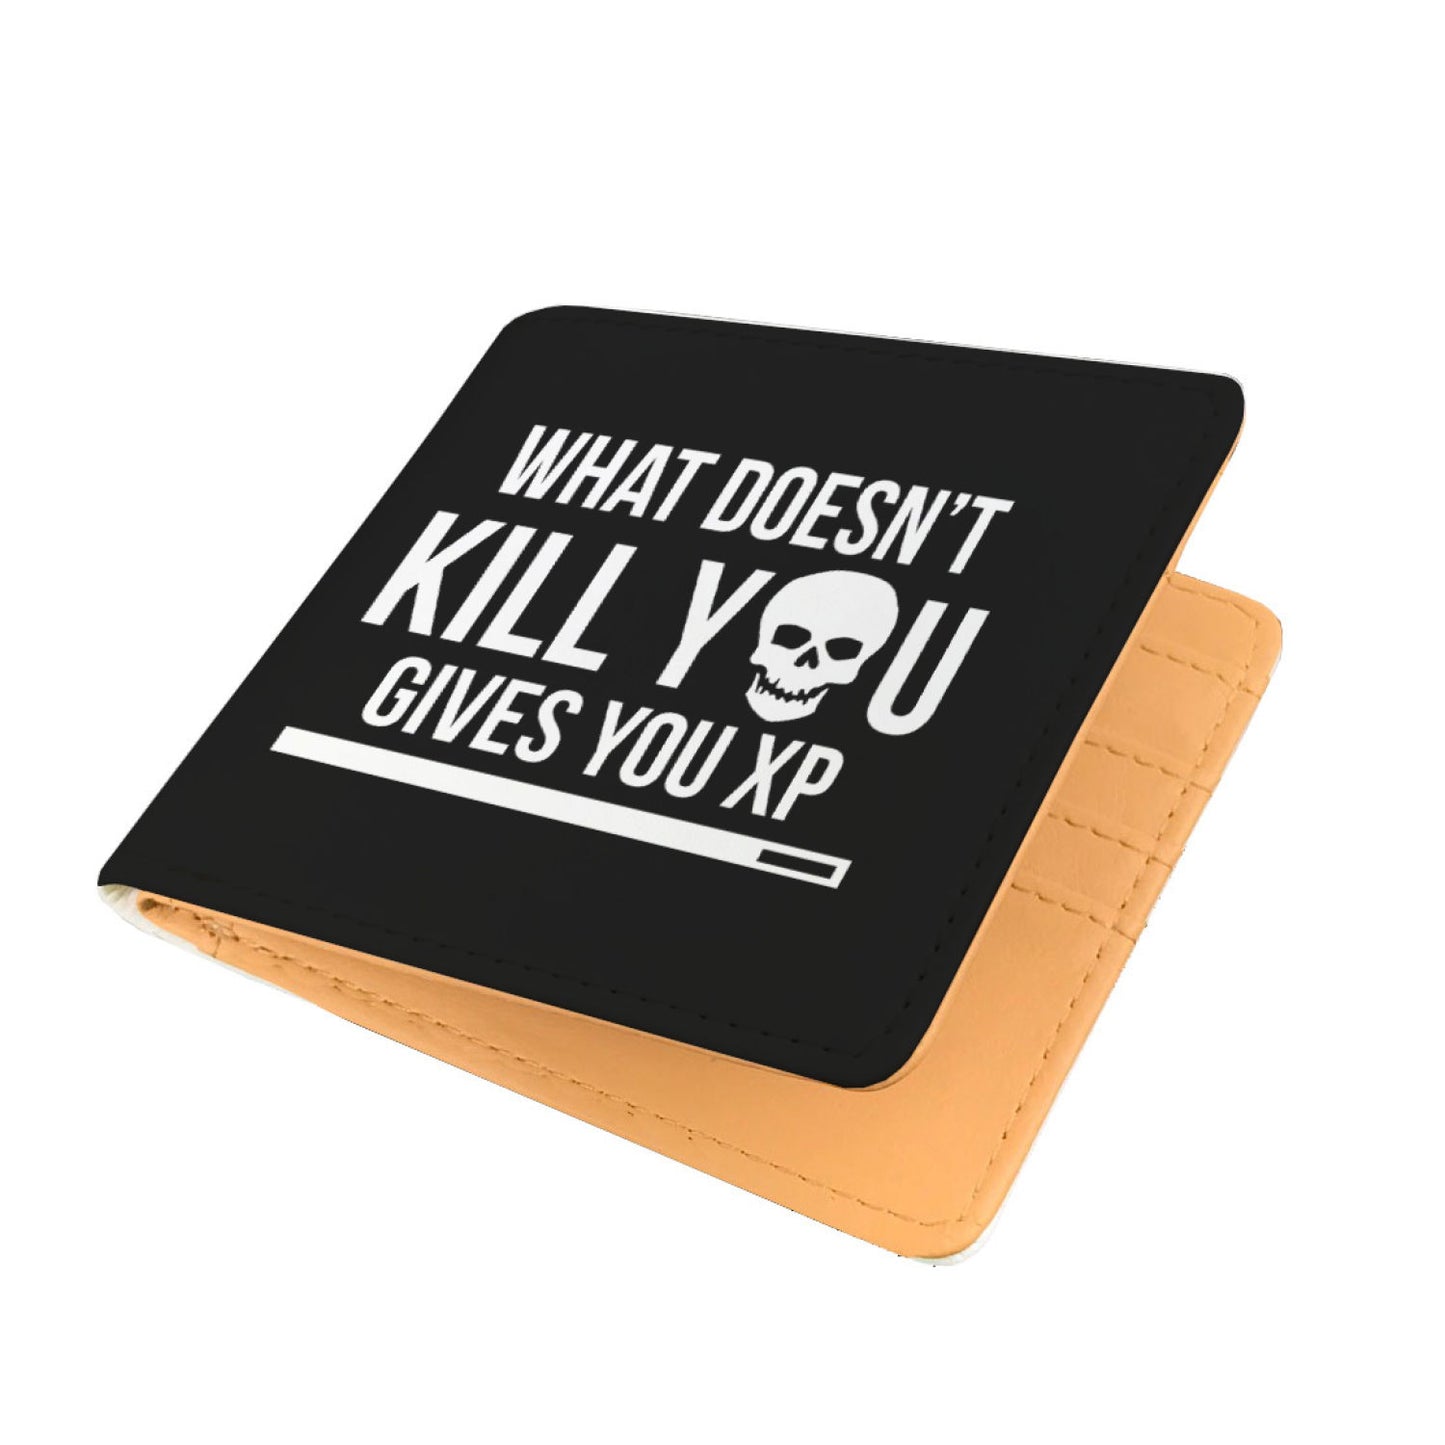 What Doesn't Kill You Gives You XP RPG Video Gamer Wallet